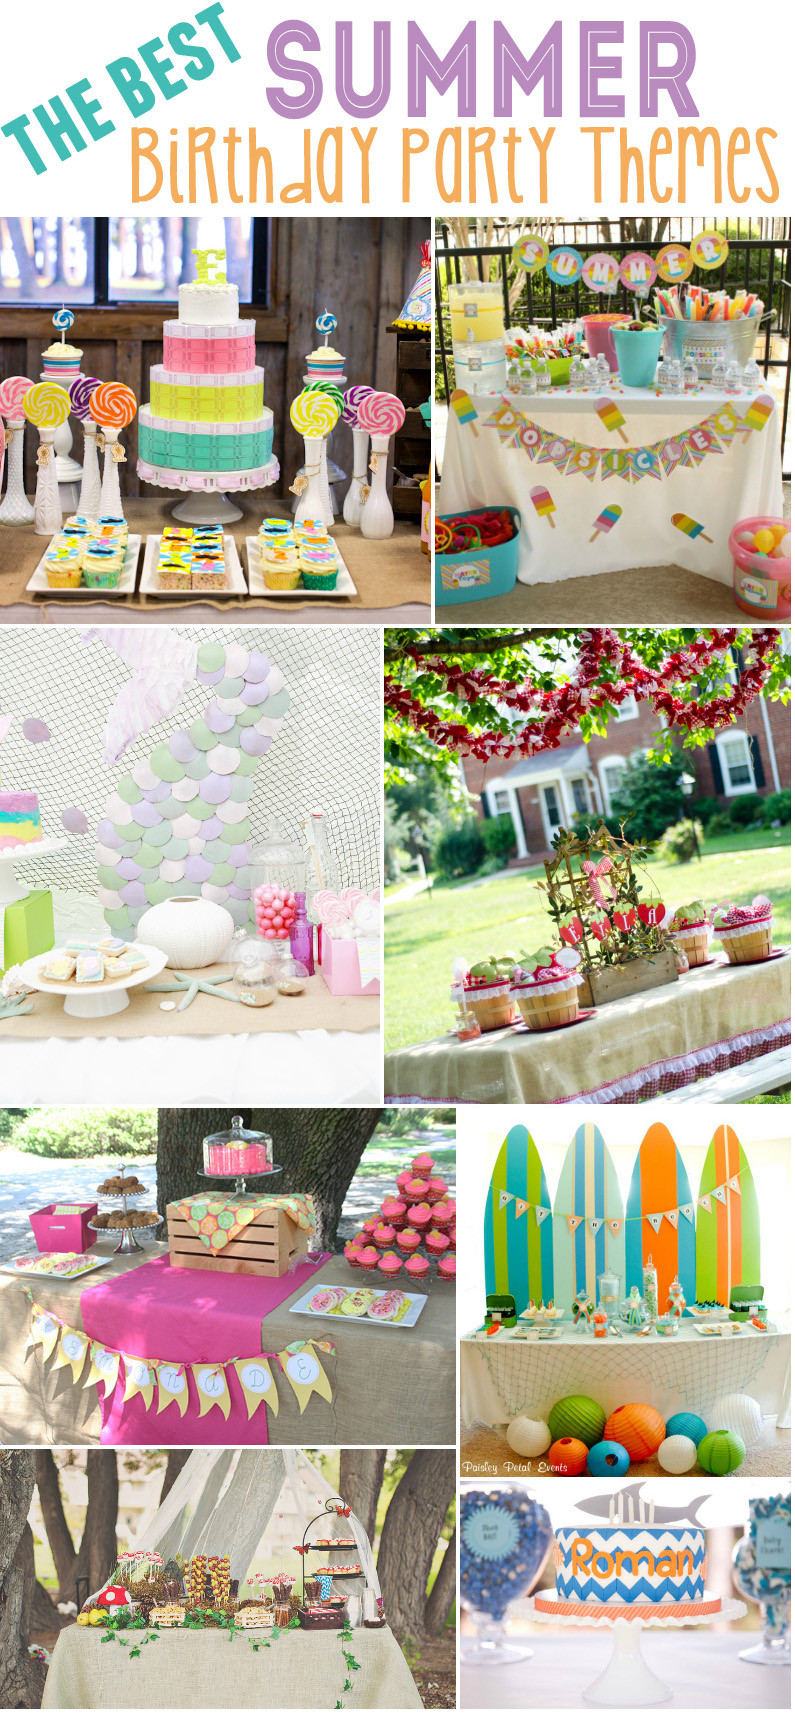 Summer Themed Party Ideas
 15 Best Summer Birthday Party Themes Design Dazzle